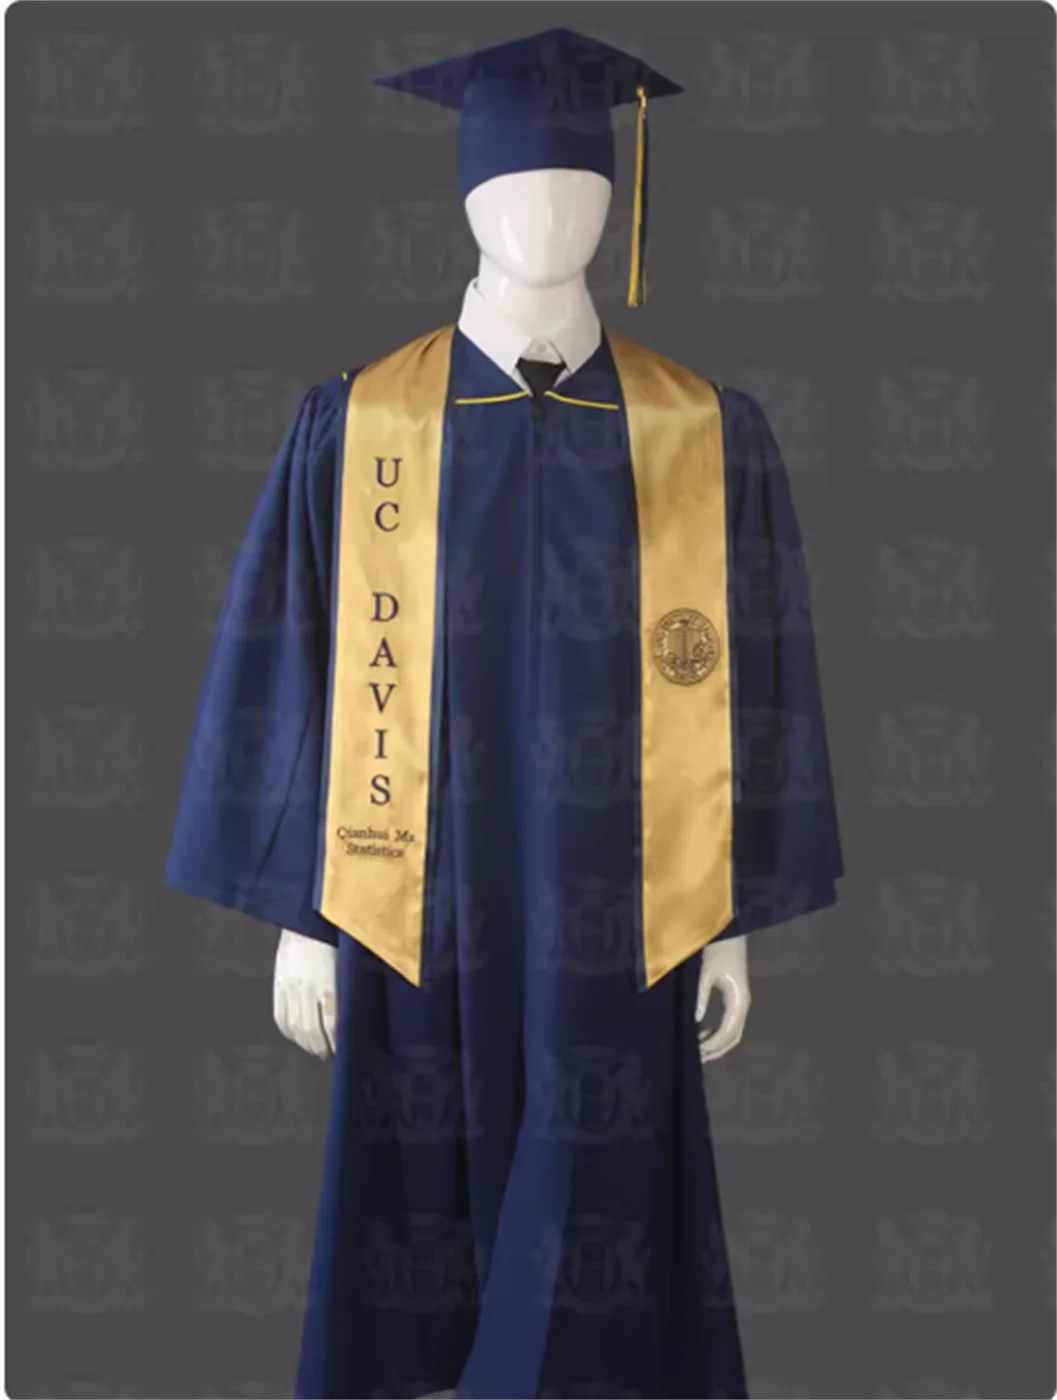 

Customization of Bachelor's and Master's/Doctoral Uniforms at the University of California, USA